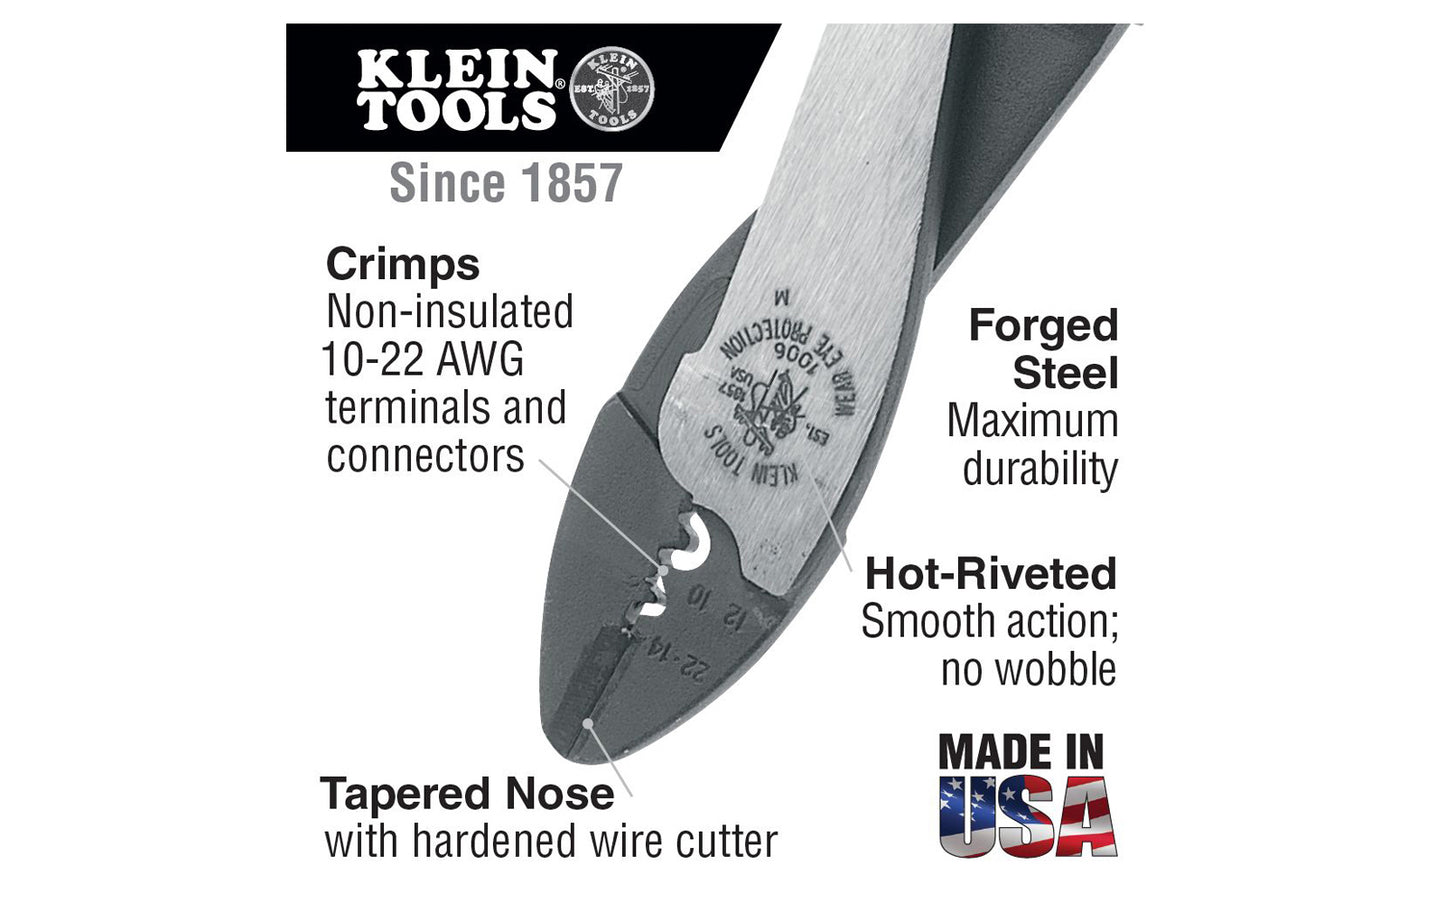 This Klein Tools Crimping & Cutting Tool 1006 is designed for crimping non-insulated solderless terminals & connectors. Wire cutter in nose specially hardened for durability. Crimper crimps non-insulated 10 to 22 AWG solderless terminals & connectors. Model 1006. Made in USA. 092644742064